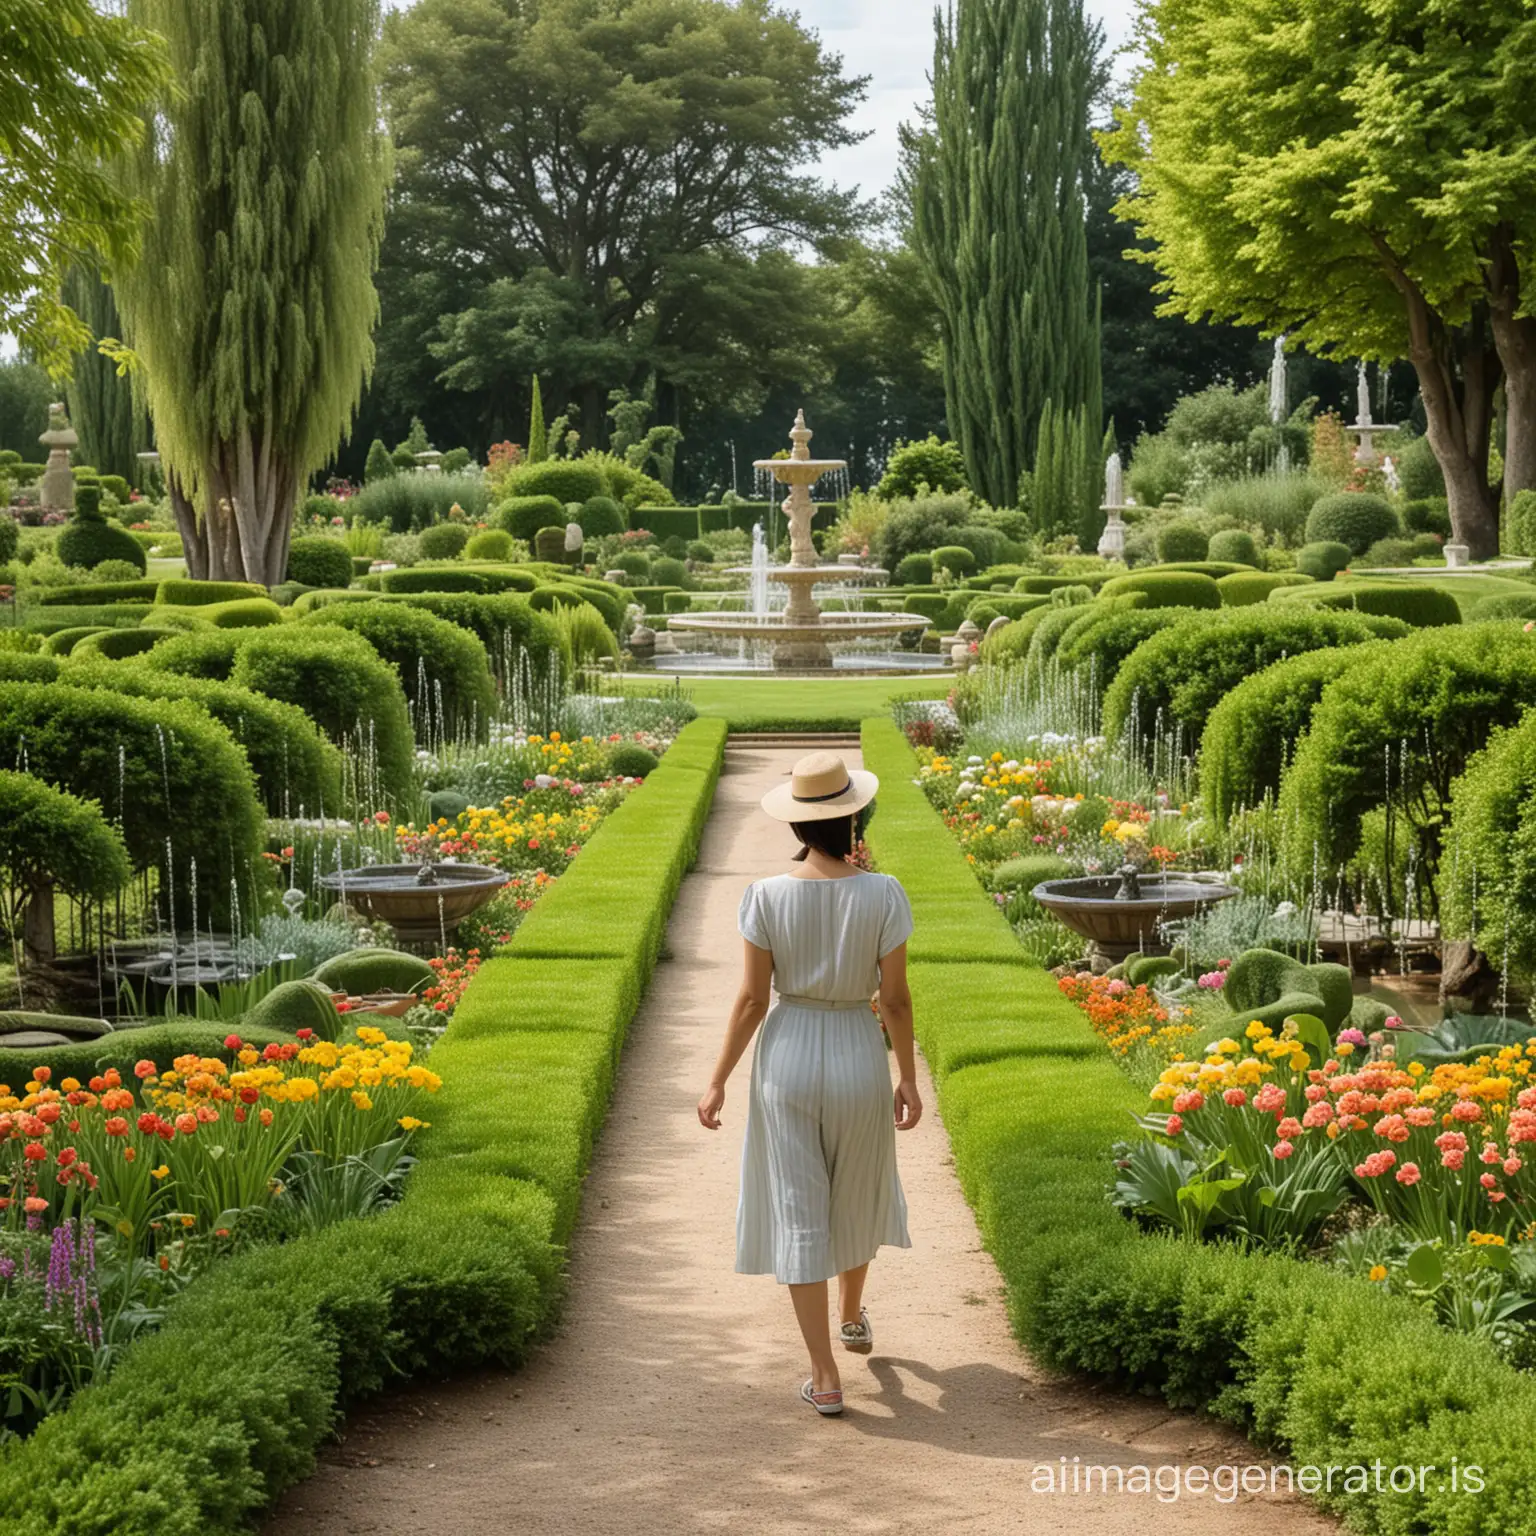 Asian-Woman-Strolling-in-Serene-French-Garden-with-Lawns-and-Fountains